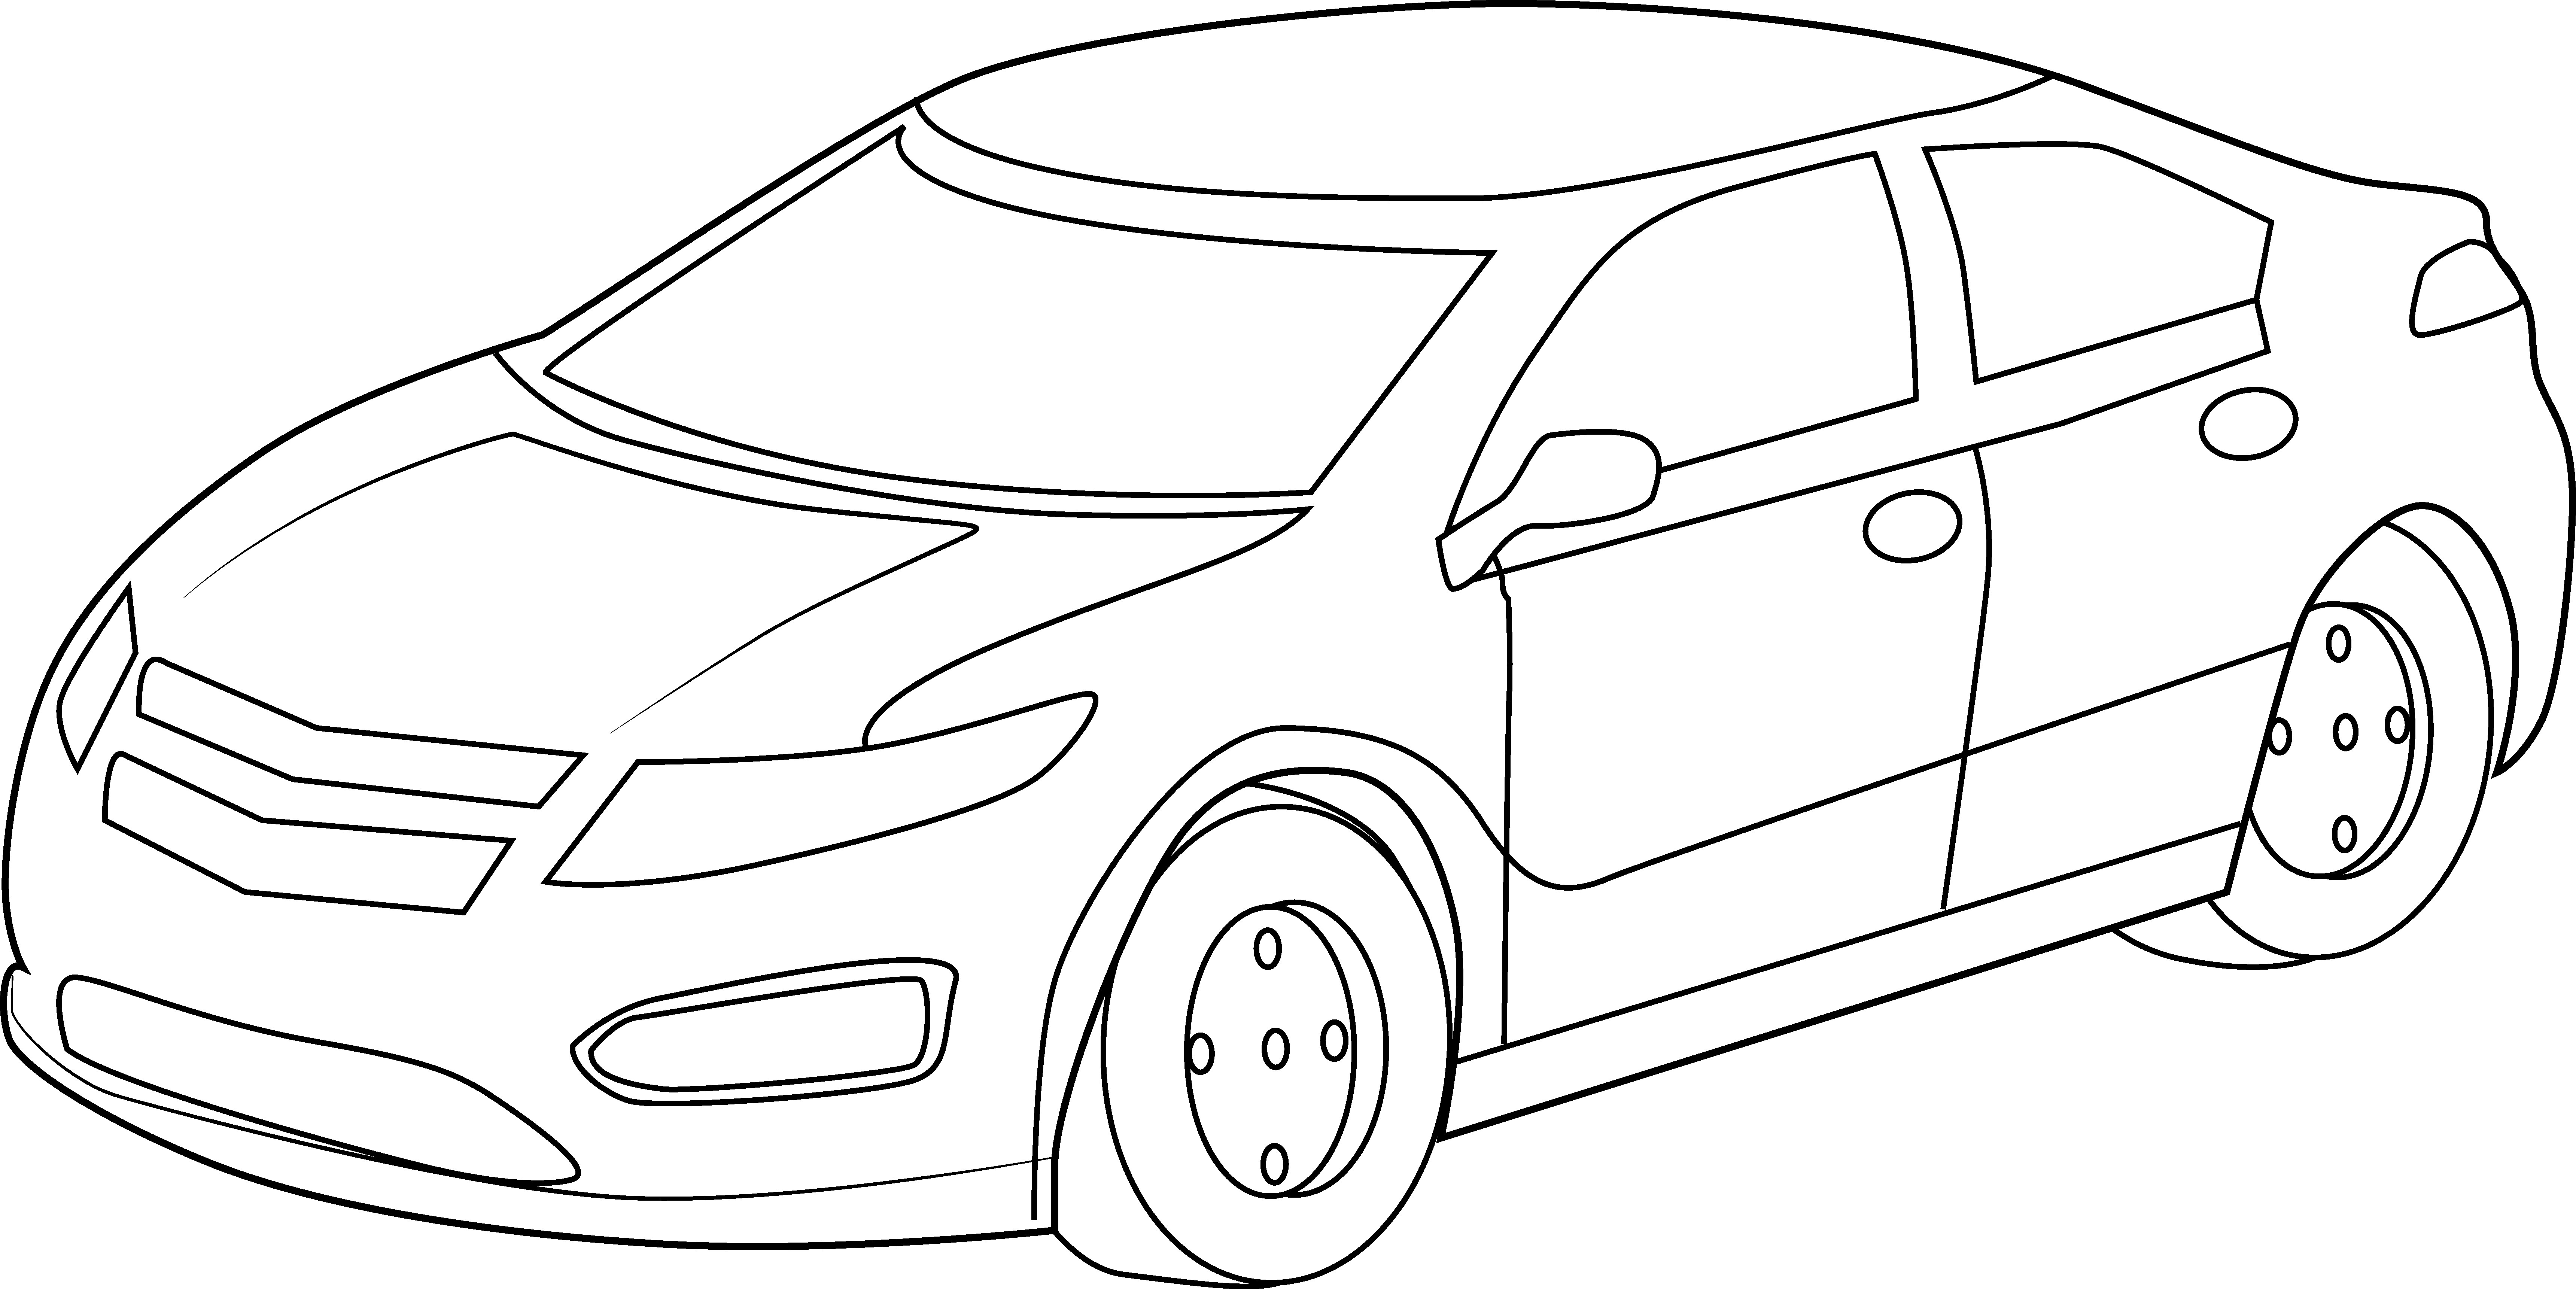 Black And White Clipart Of Car.